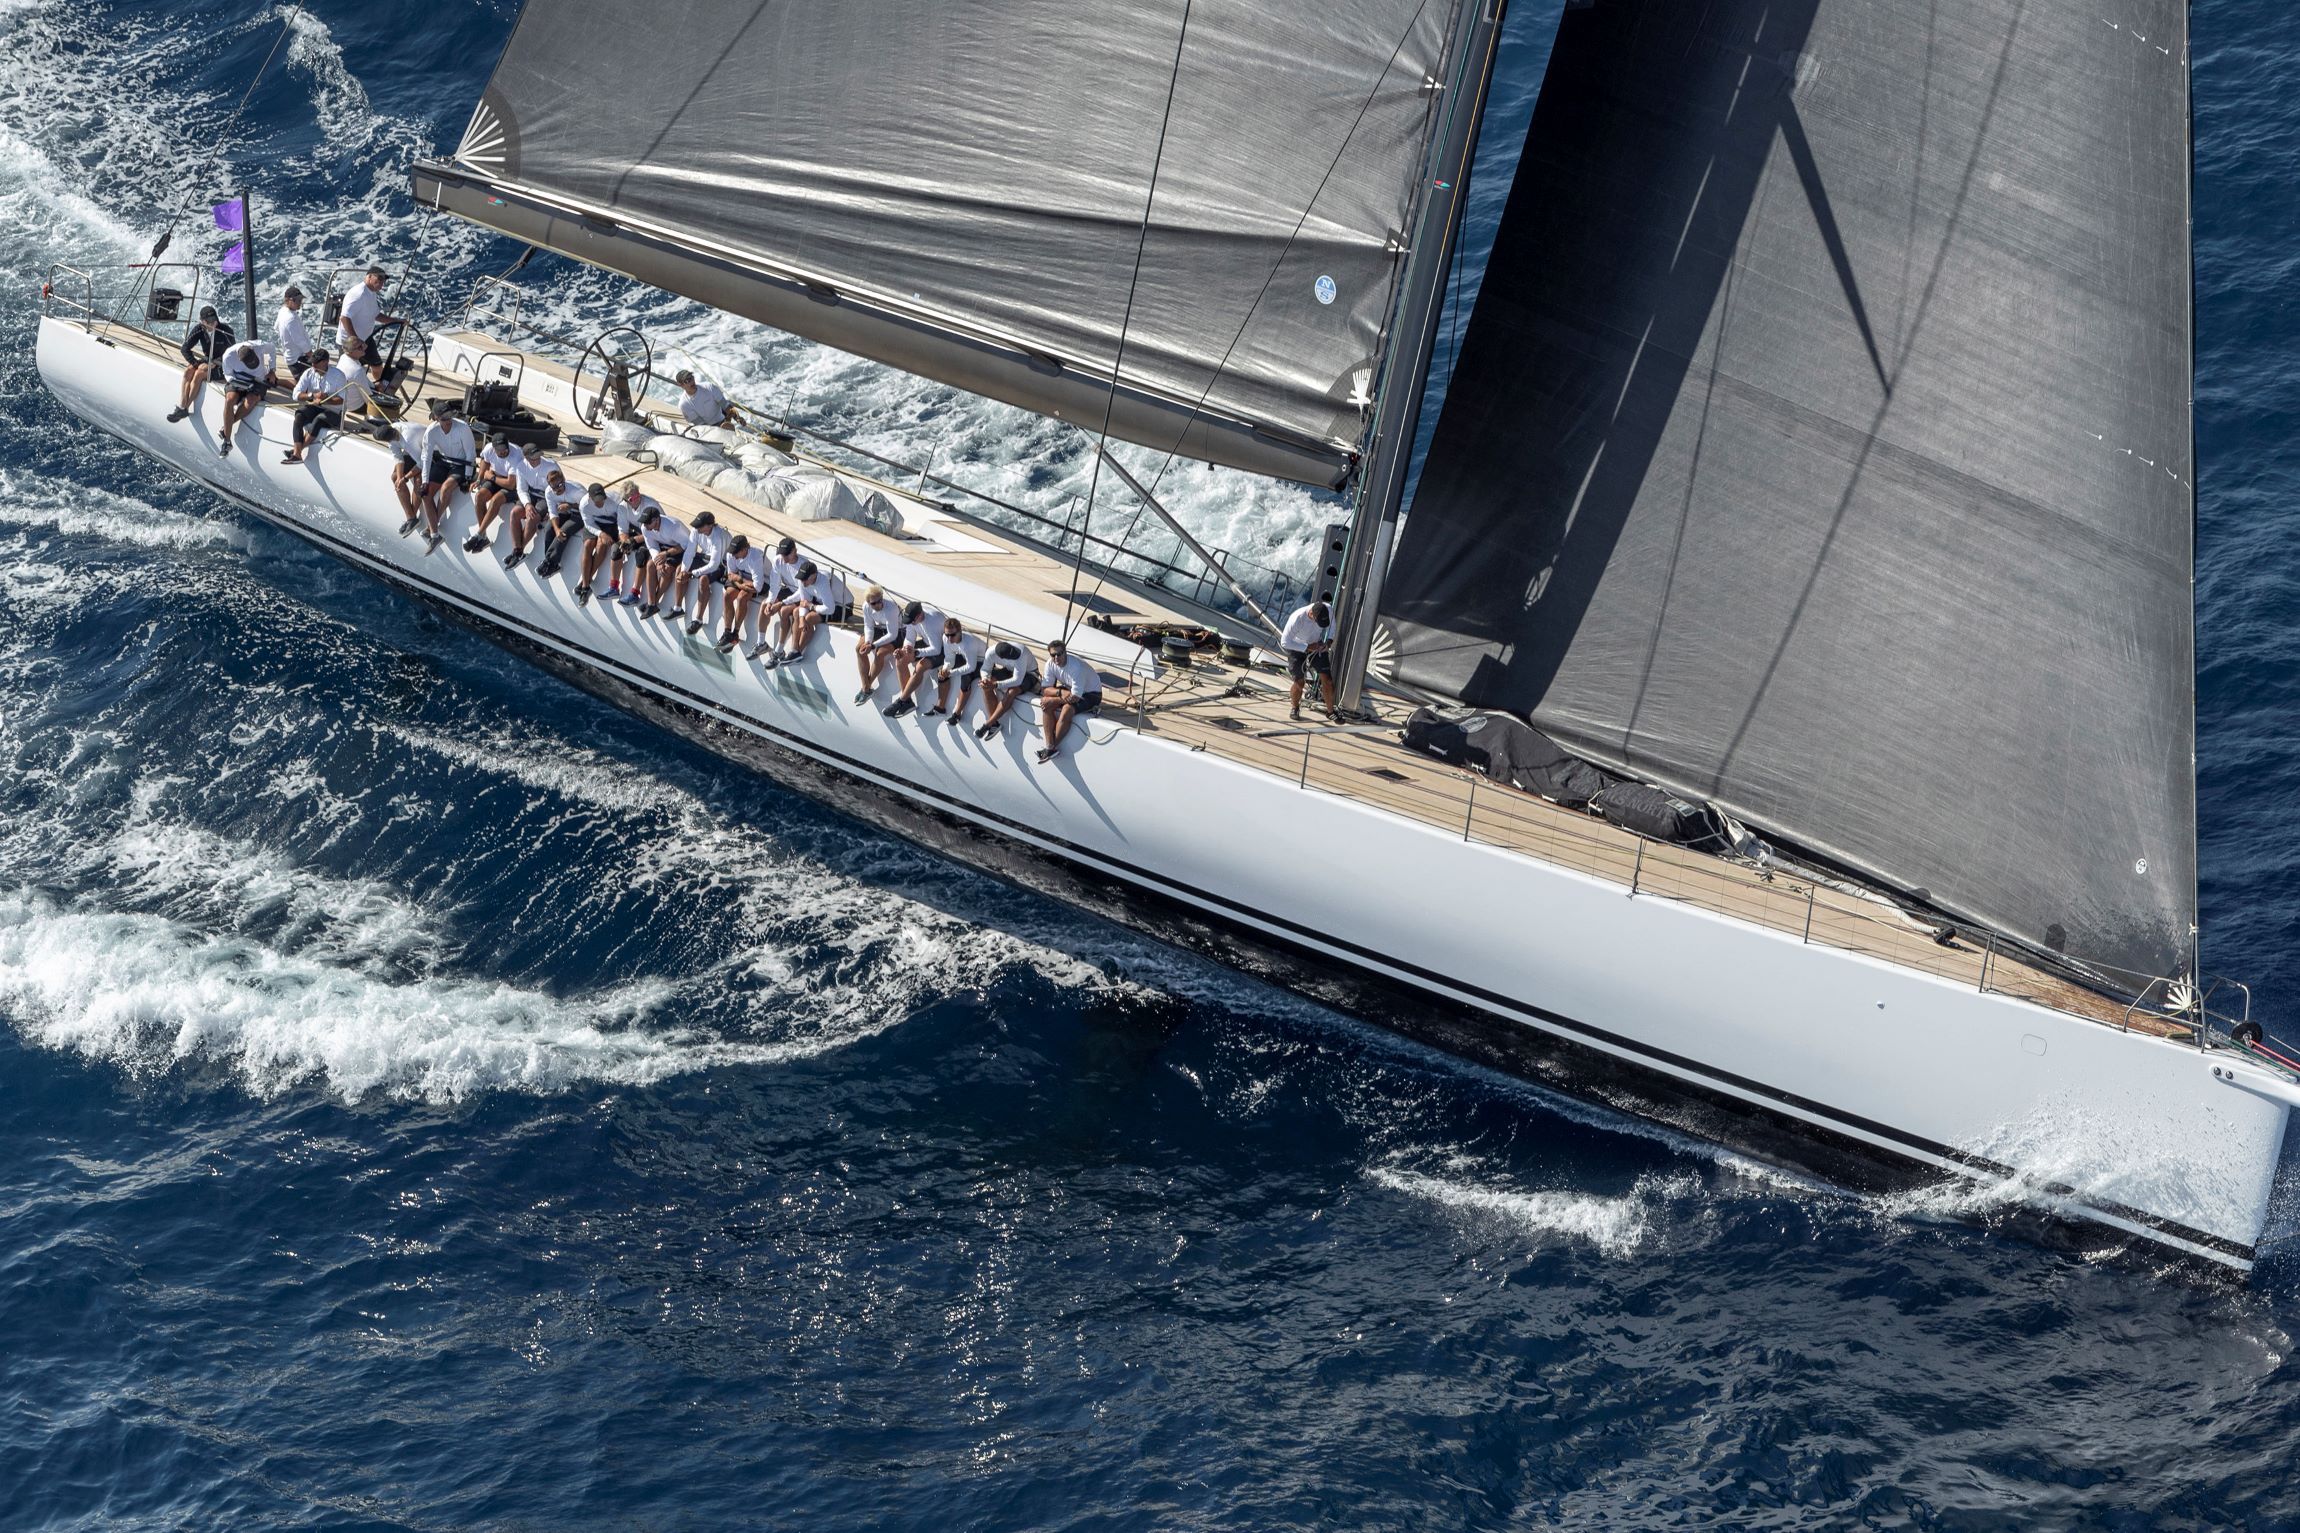 Les Voiles de Saint-Tropez to feature seven large classic schooners, the first flying Maxi and the return of Pride!